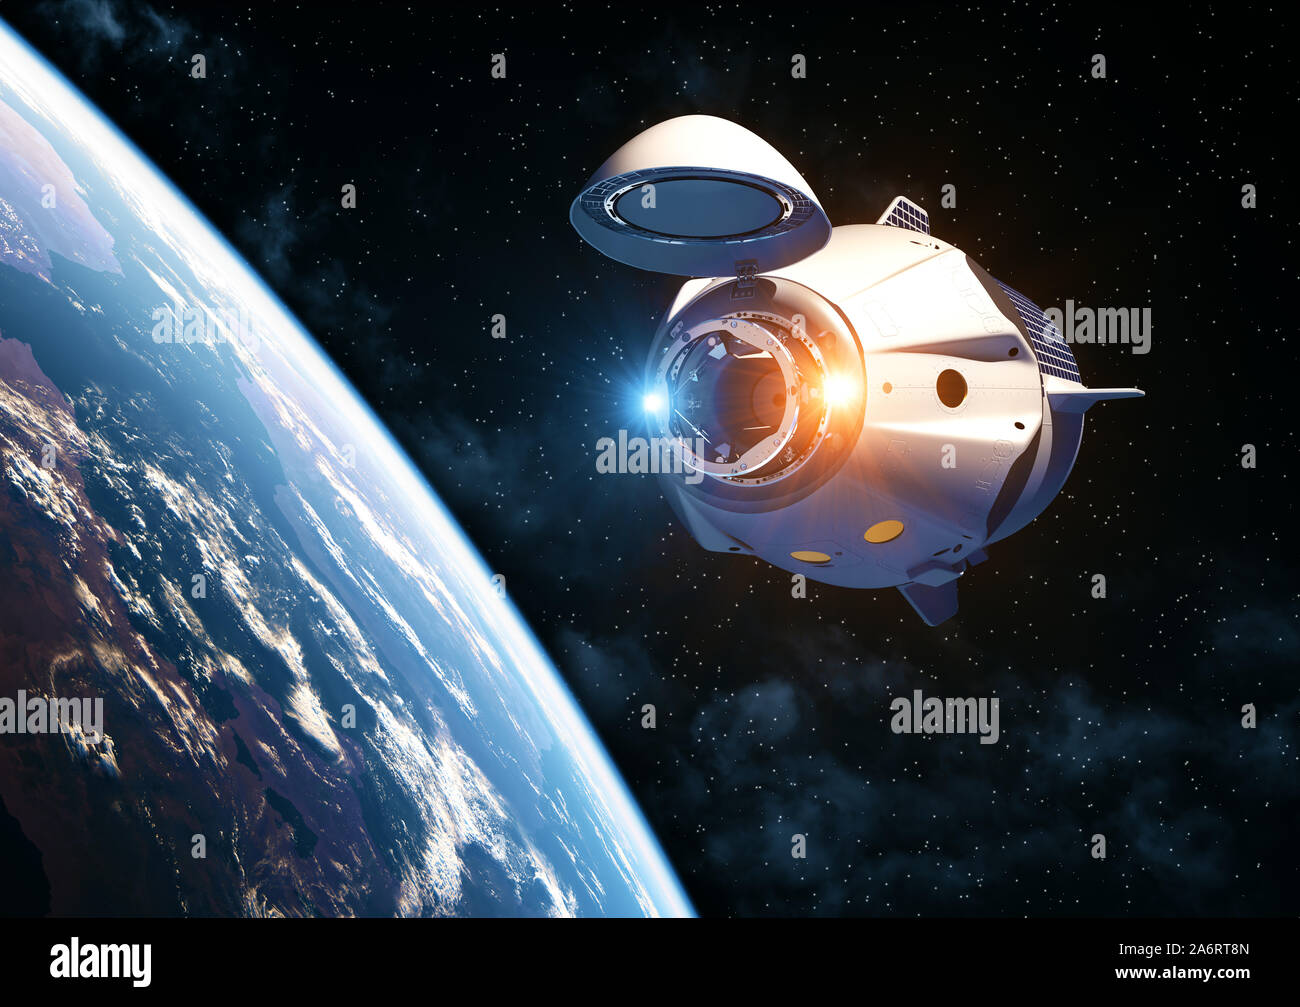 Commercial Spacecraft With Open Docking Hatch Orbiting Earth. 3D Illustration. Stock Photo